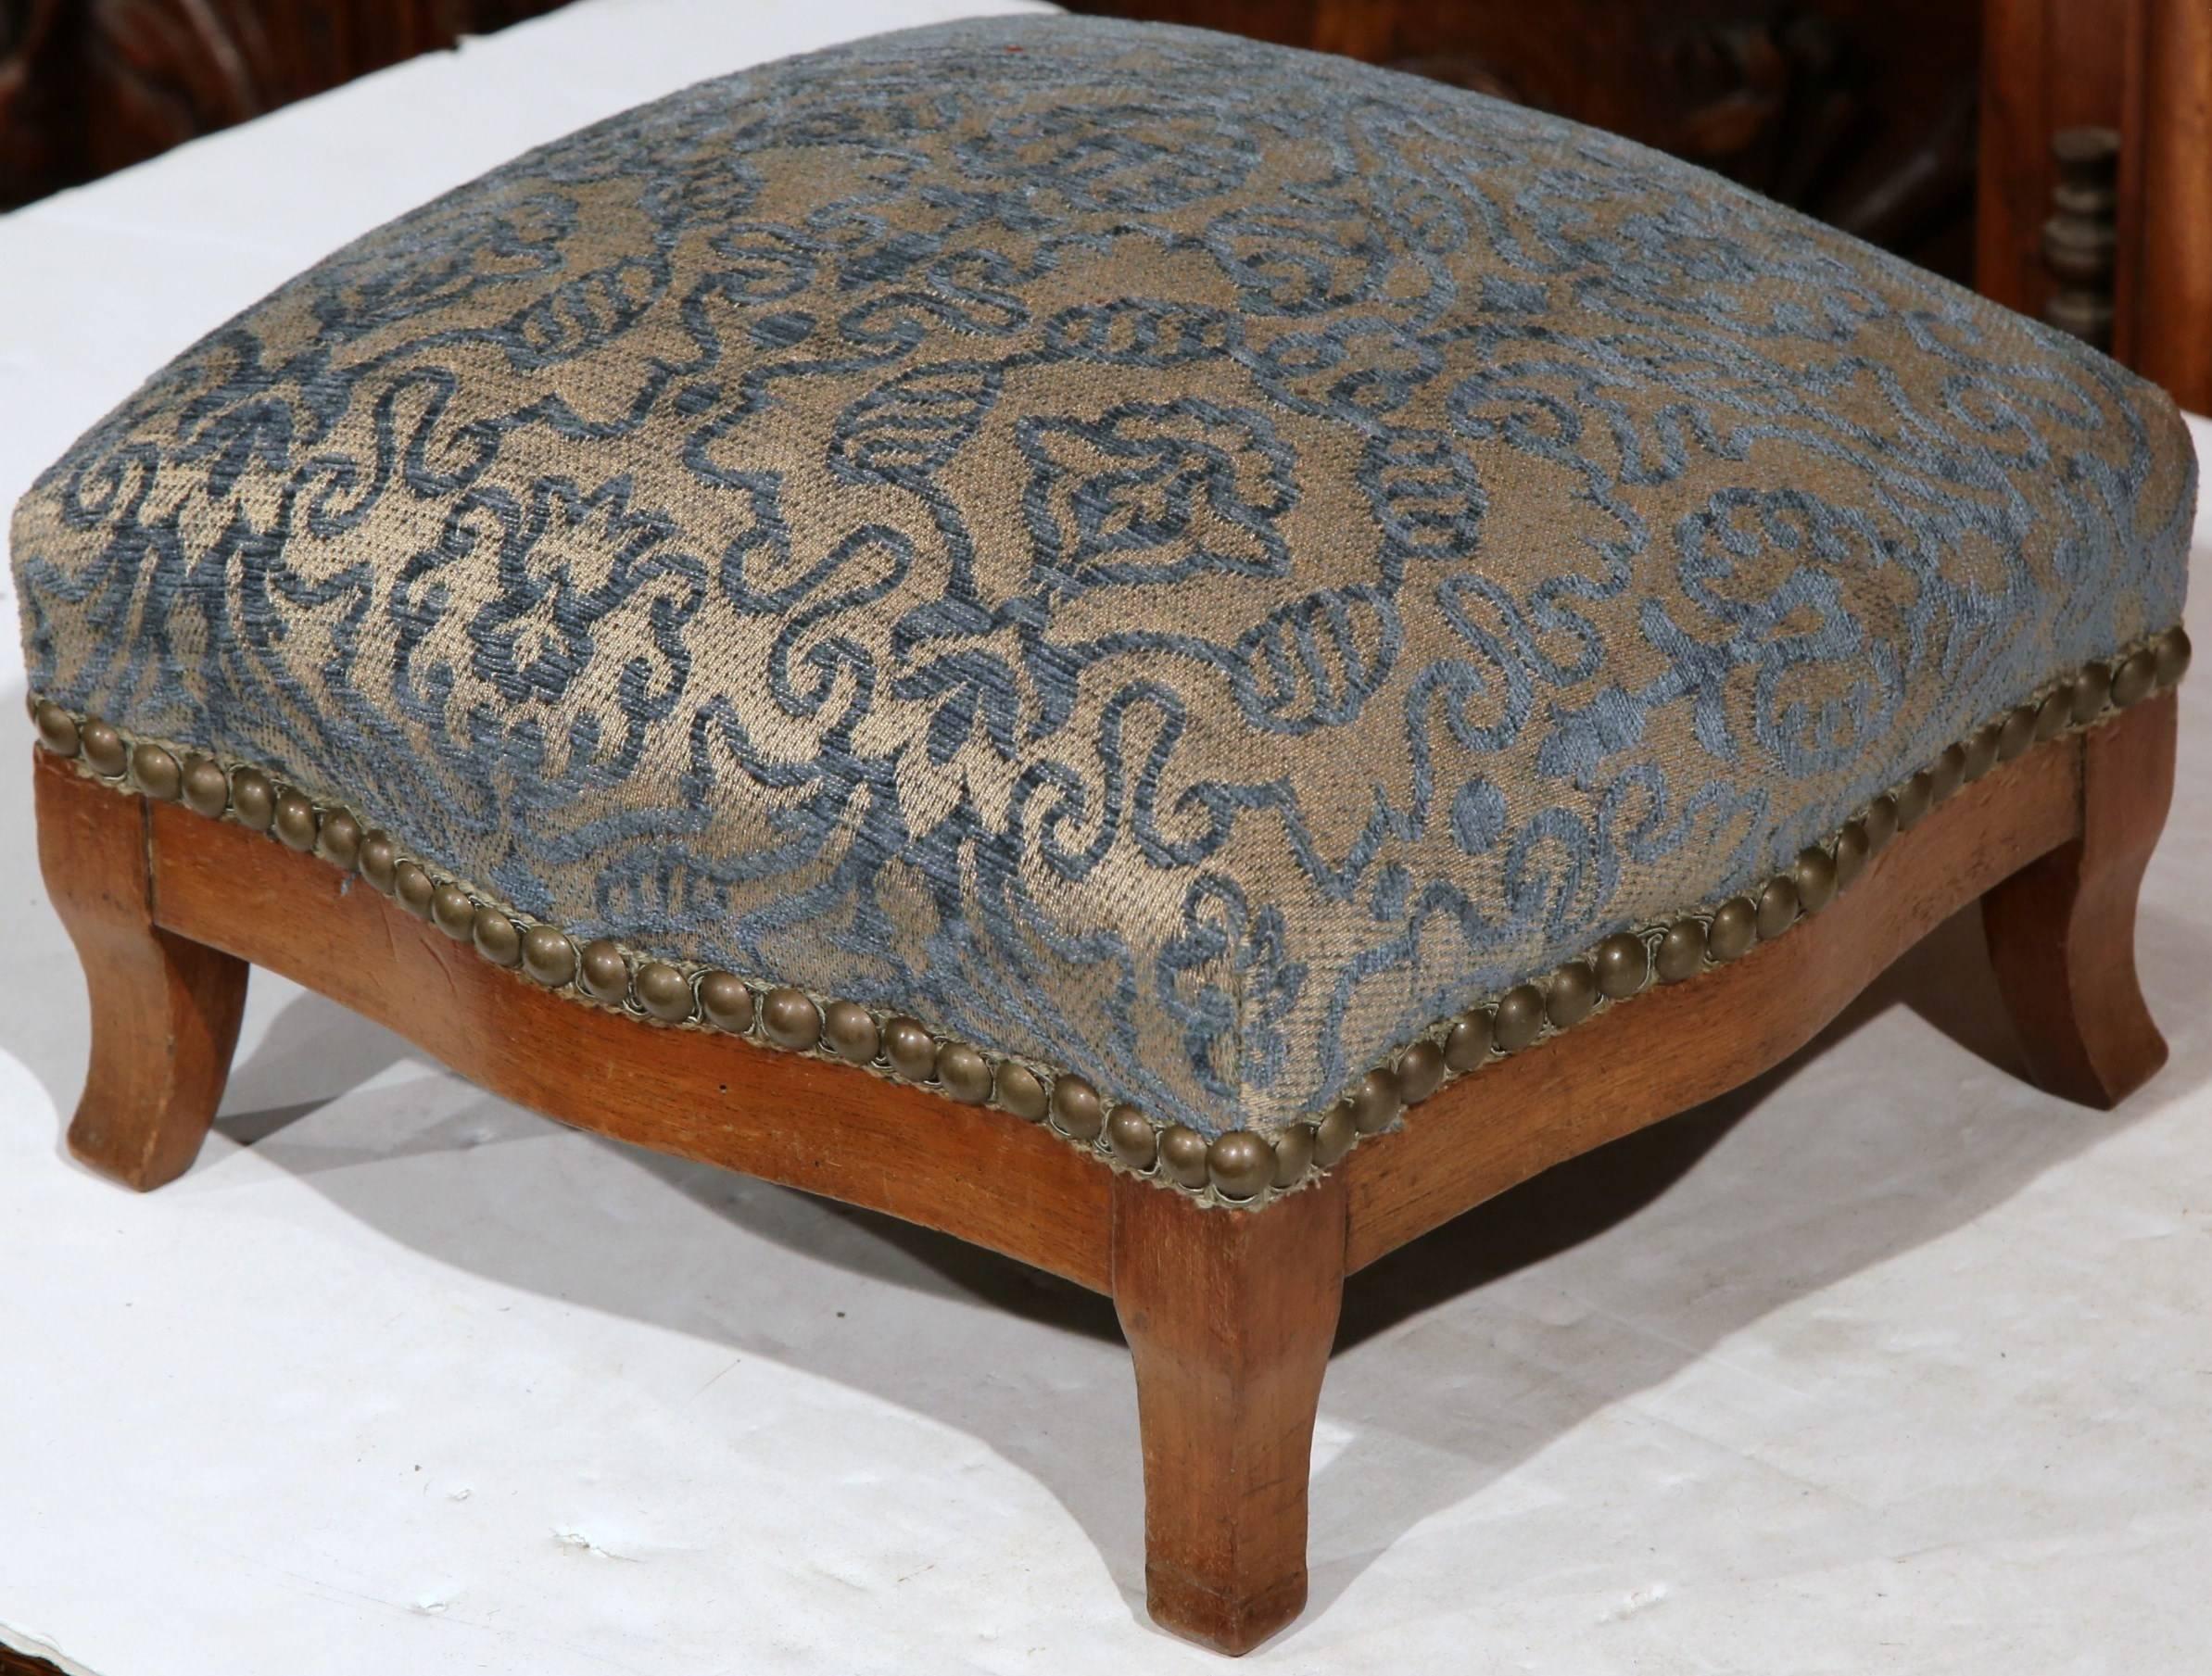 Fine antique foot stool from France, circa 1870, with scrolled feet and shaped apron, this stool has been redone with fine blue and grey cut velvet and antiqued nailheads. Excellent condition.